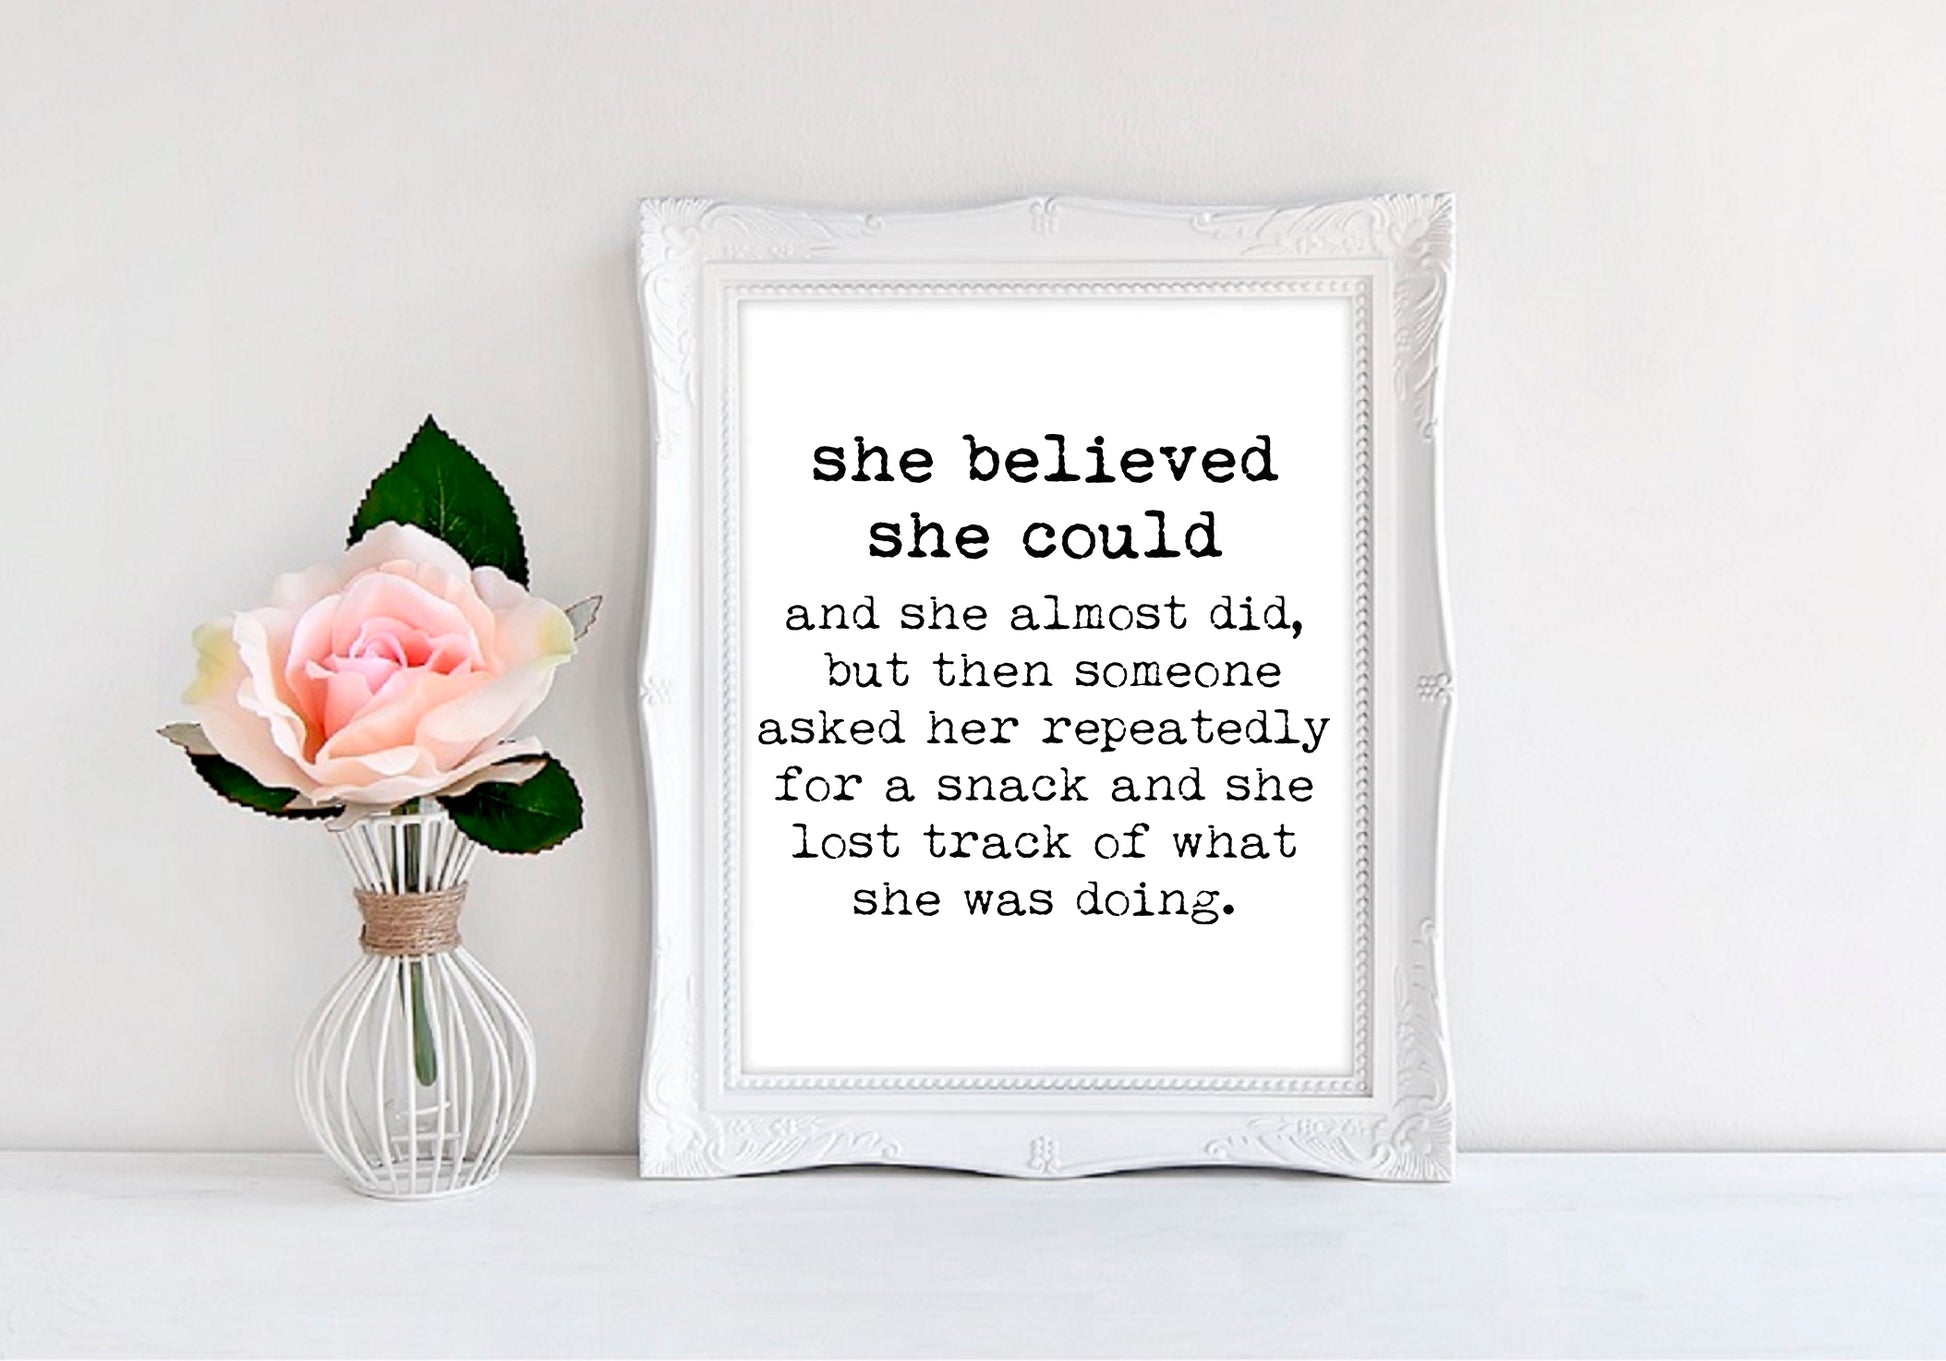 She Believed She Could (Until Asked Repeatedly For A Snack) - 8"x10" Wall Print - MoonlightMakers